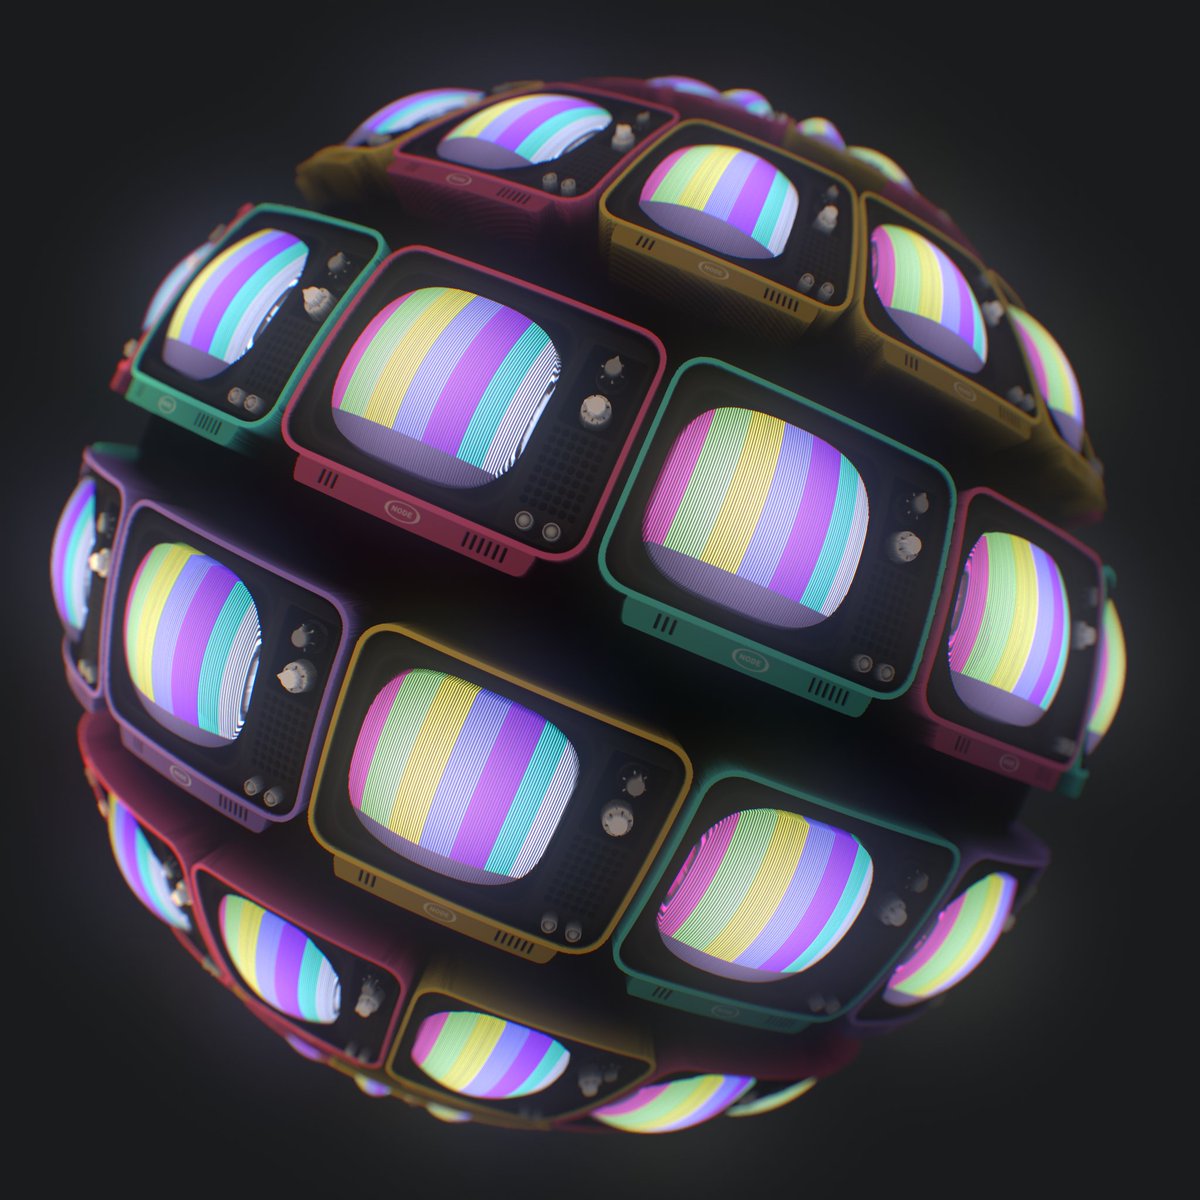 #Nodevember Day 2-3 for '4 sided' 🟦🟪🟨🟥 A procedural retro tv #material made fully in #SubstanceDesigner !! 📺✨ Drop a comment 👇 if you'd like to see a tutorial! Will be polishing this guy up more. @Substance3D #nodevember2021